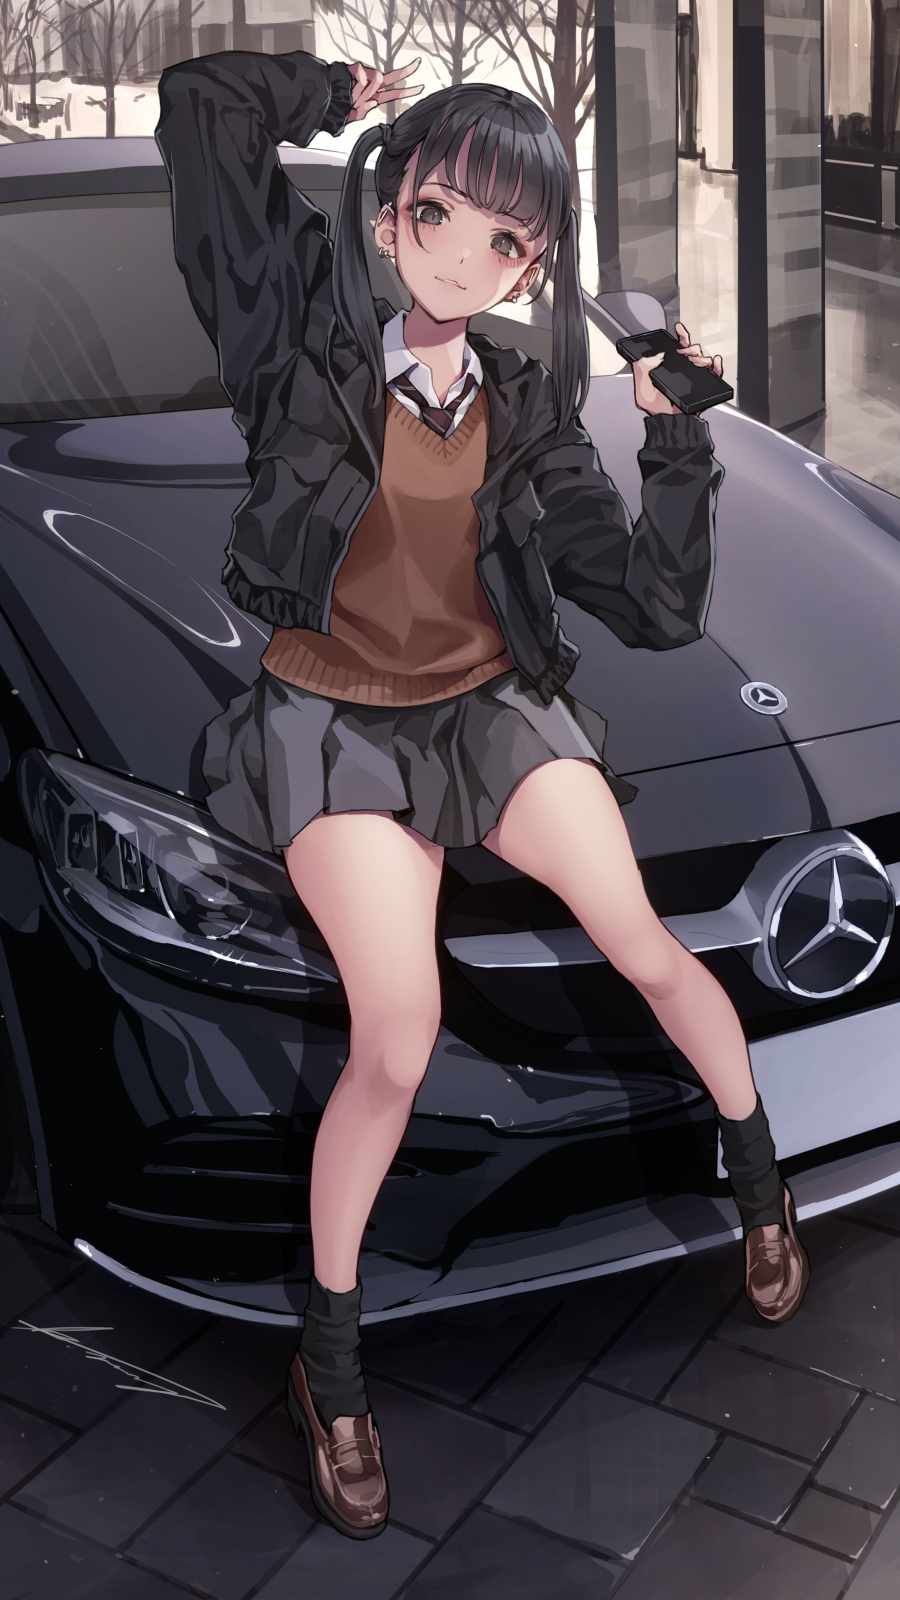 Girls On Cars Wallpapers